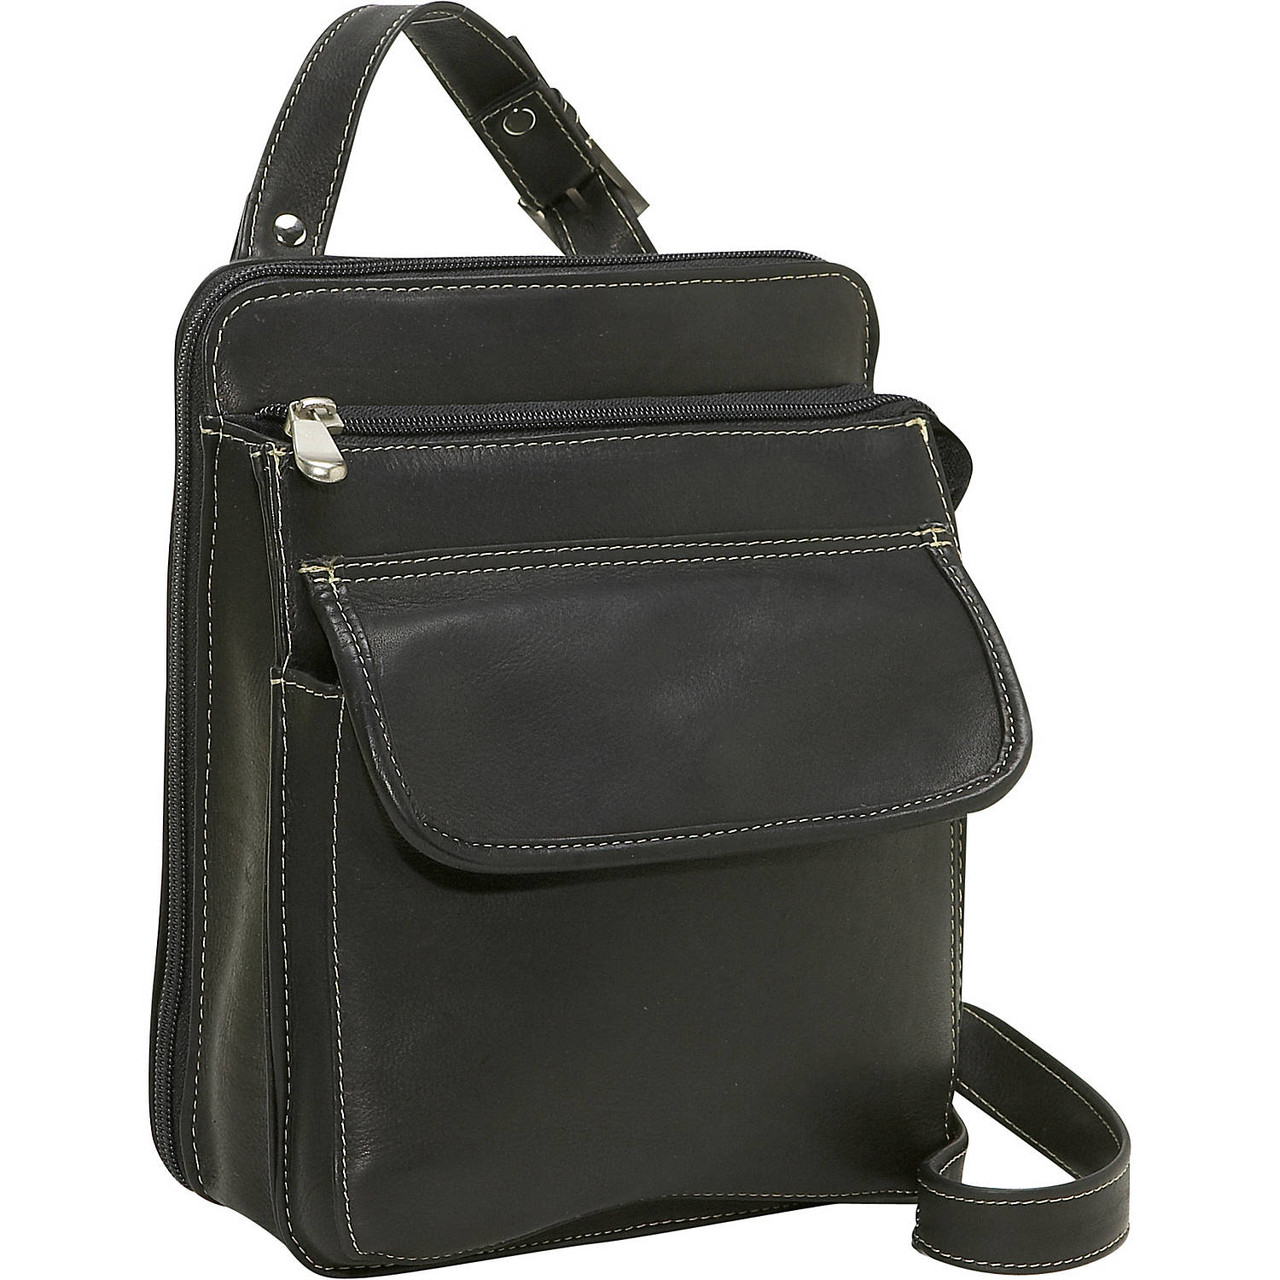 Smith & Wesson Structured Handbag – Cameleon Bags